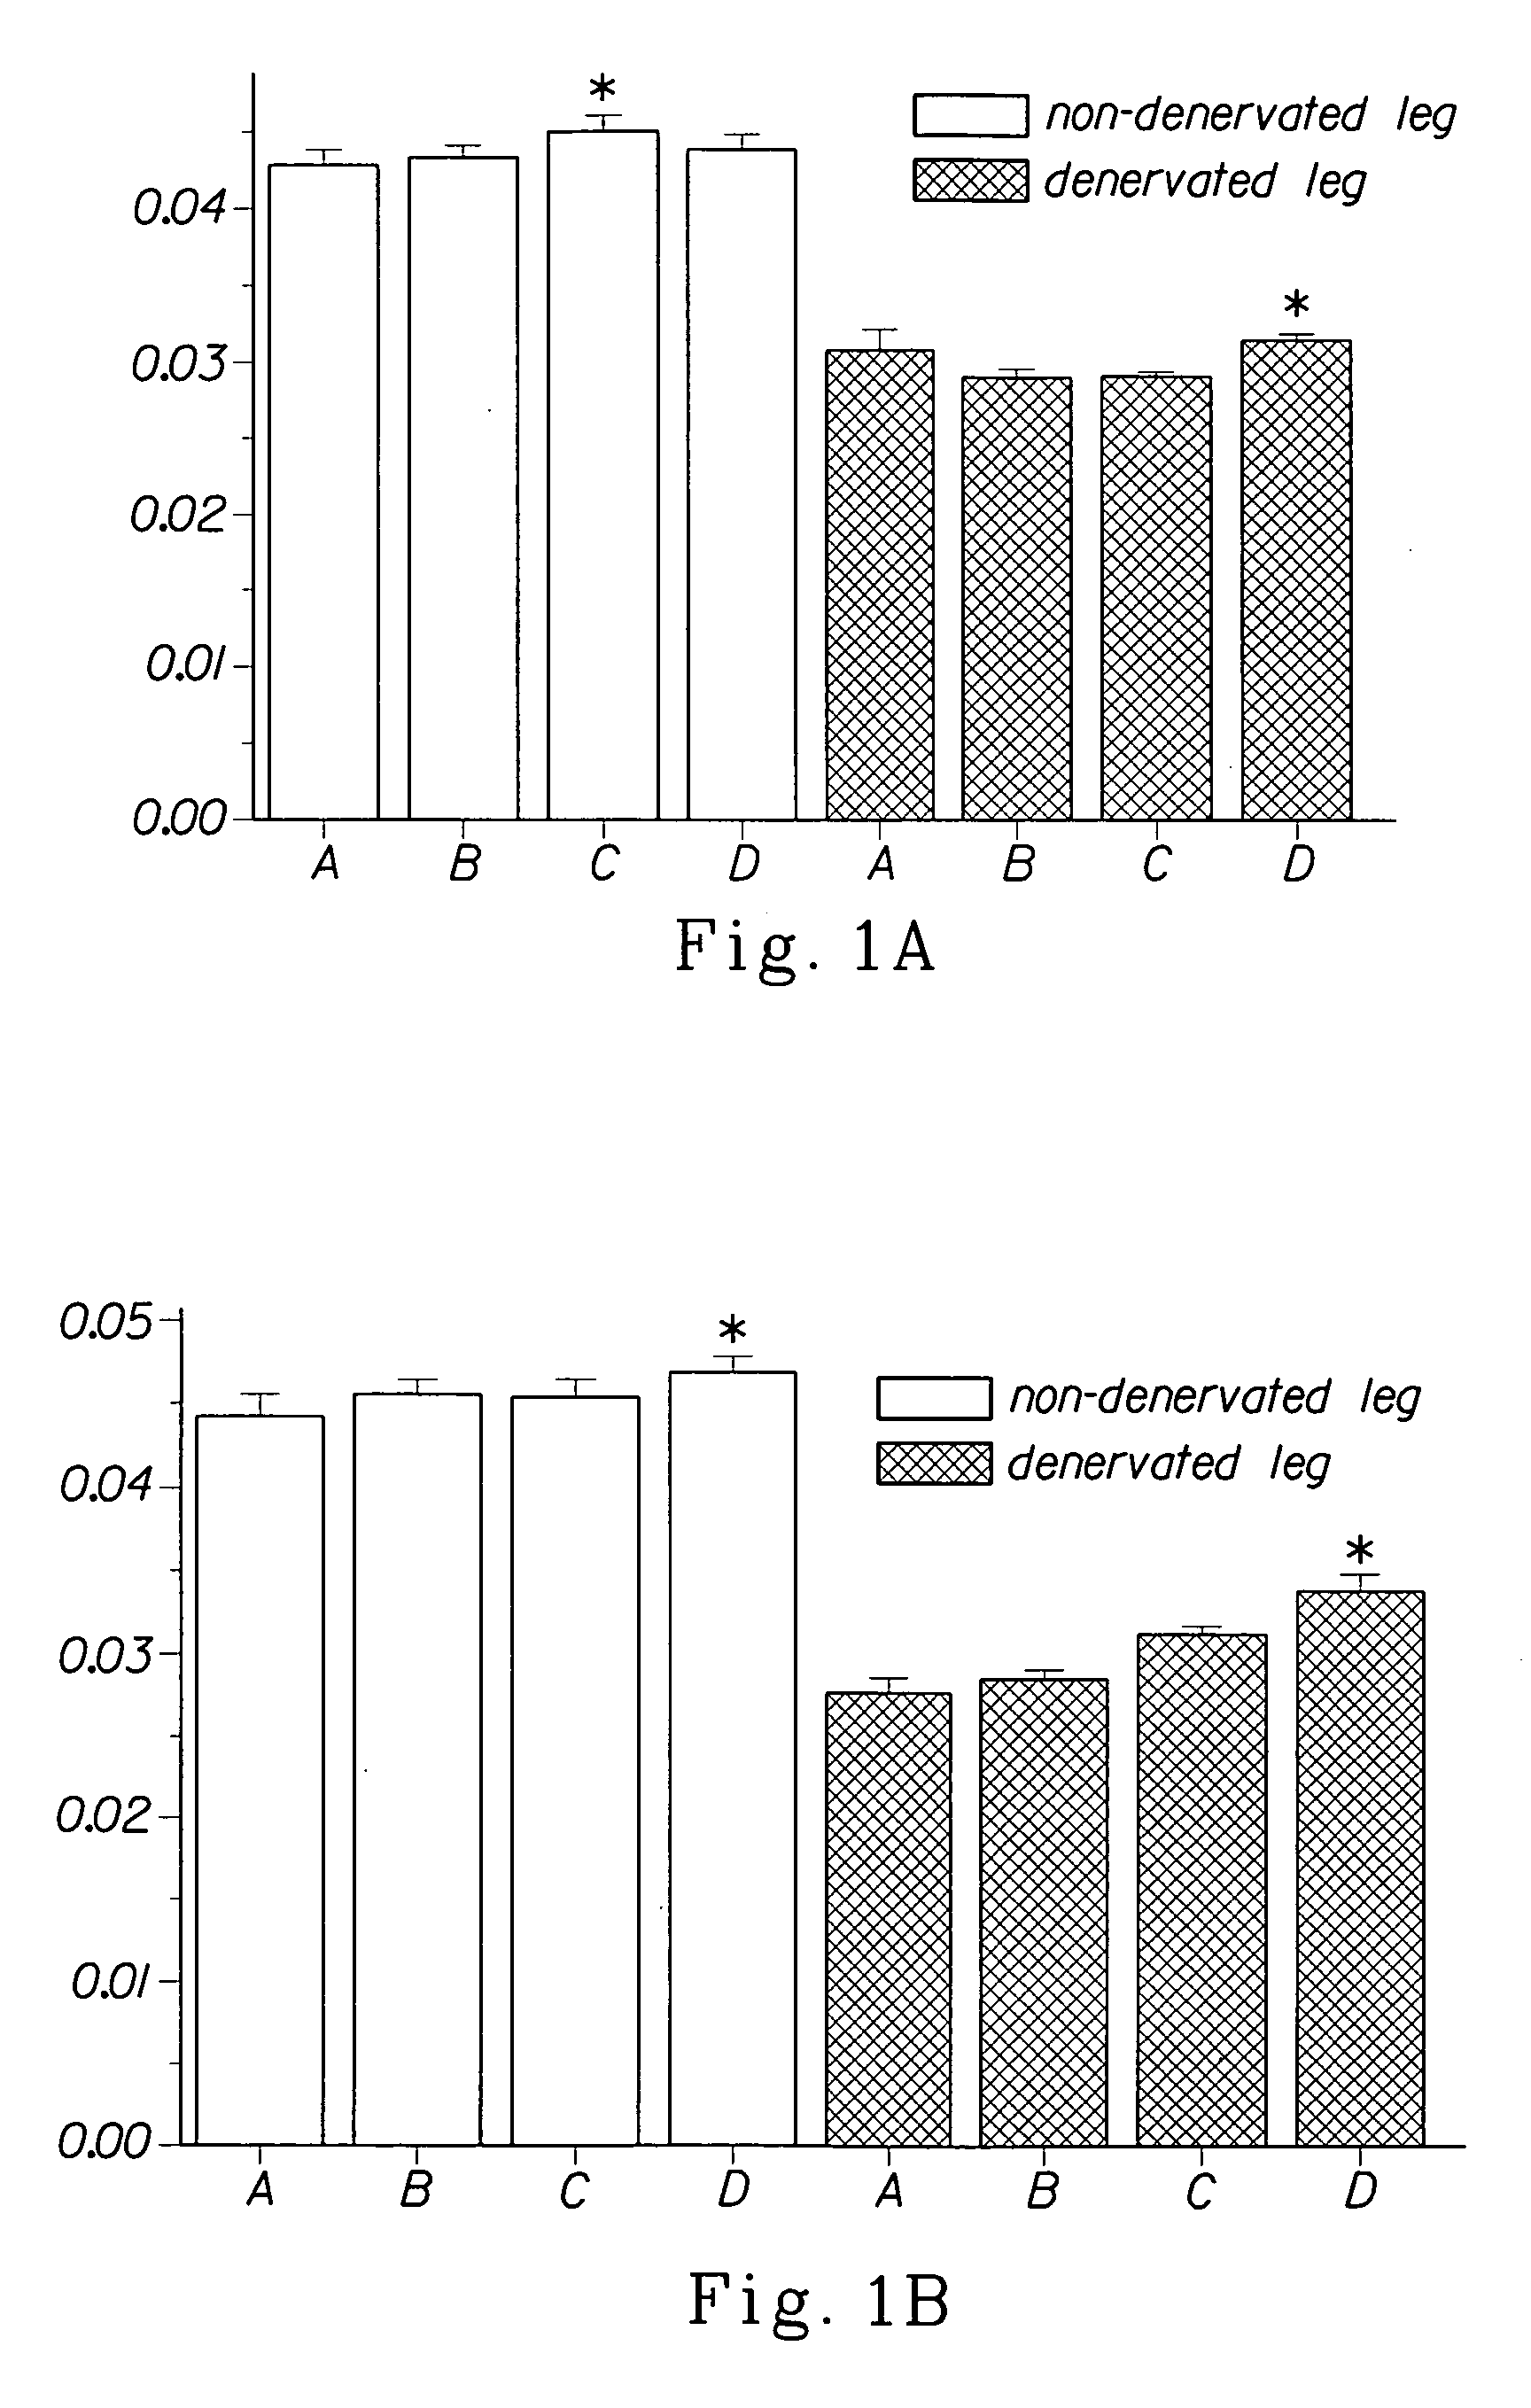 Methods for identifying compounds for regulating muscle mass or function using dopamine receptors